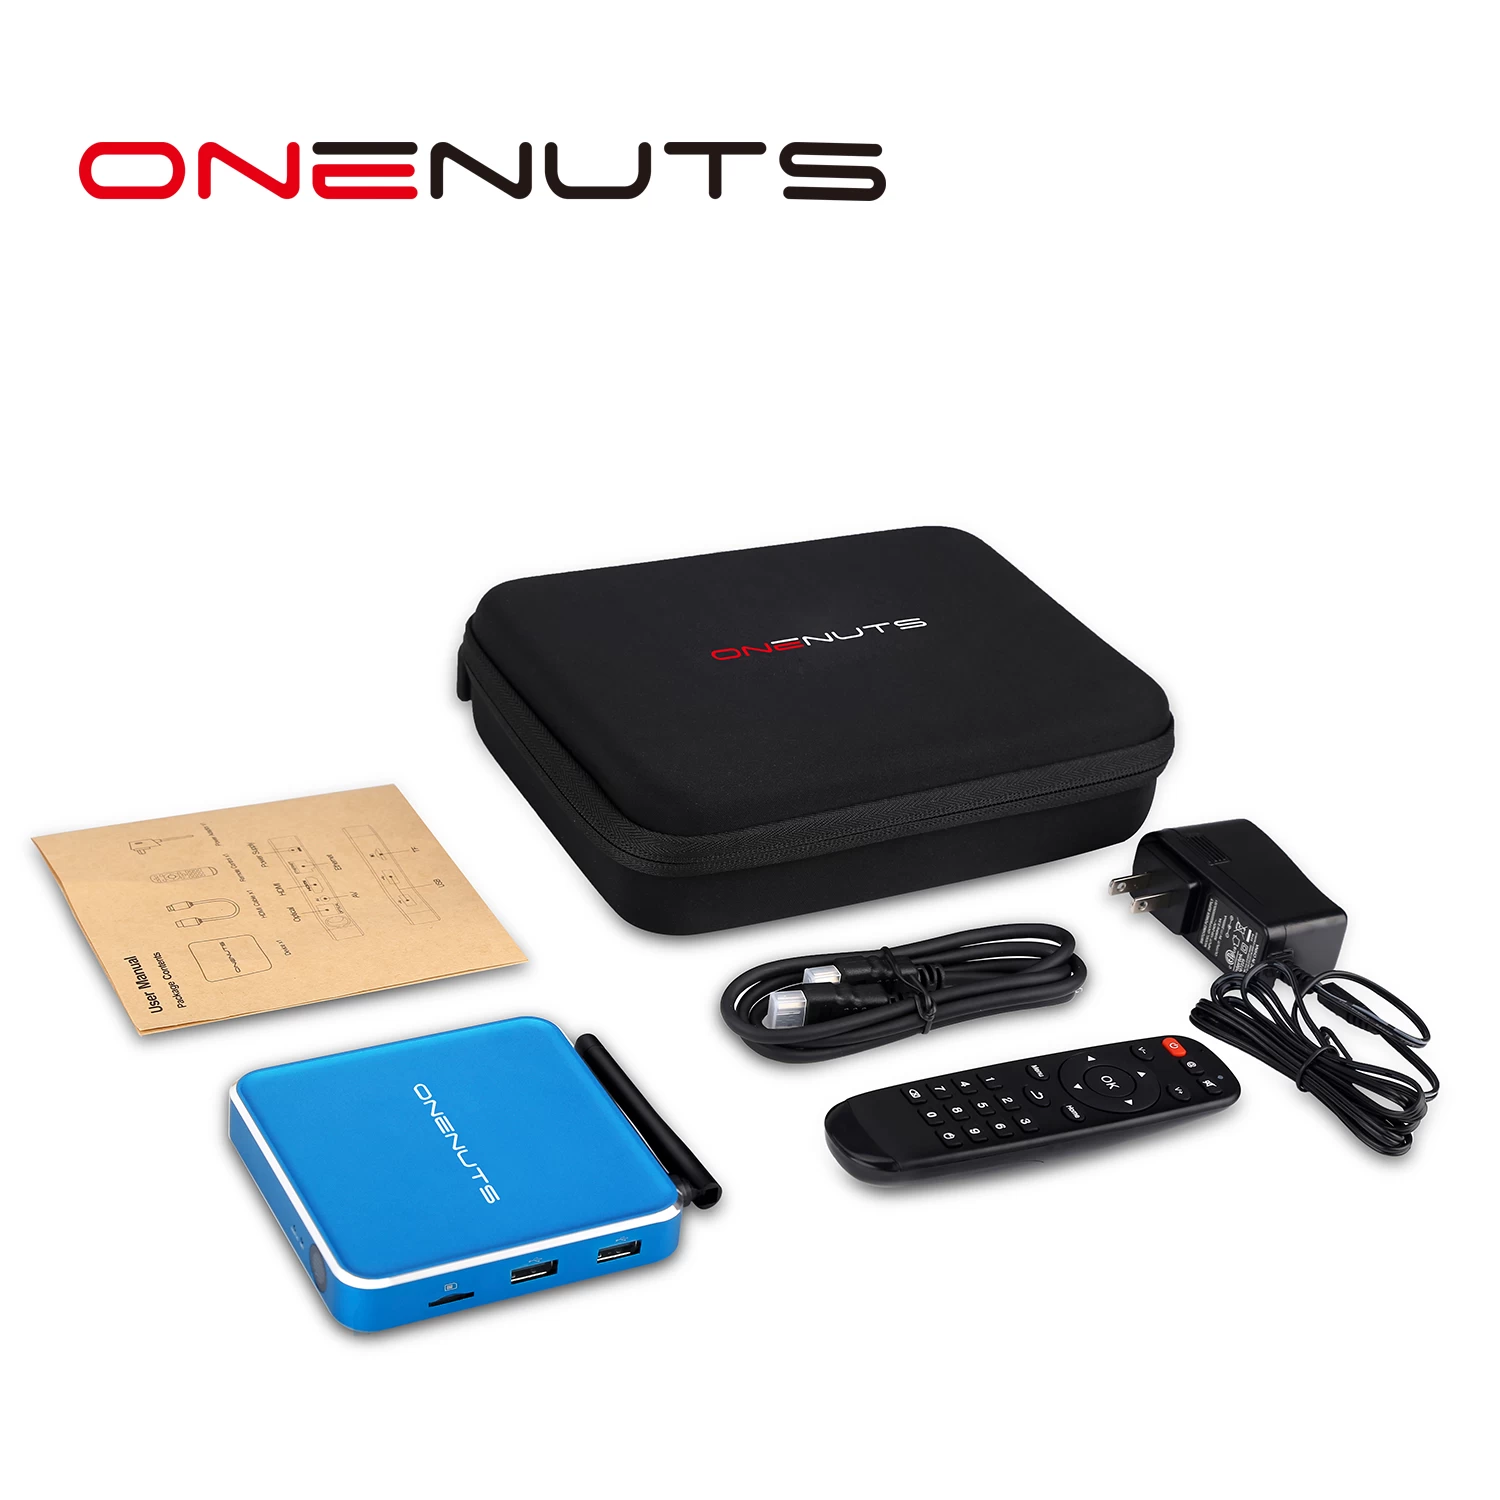 Android TV Box supplier, android smart tv box company